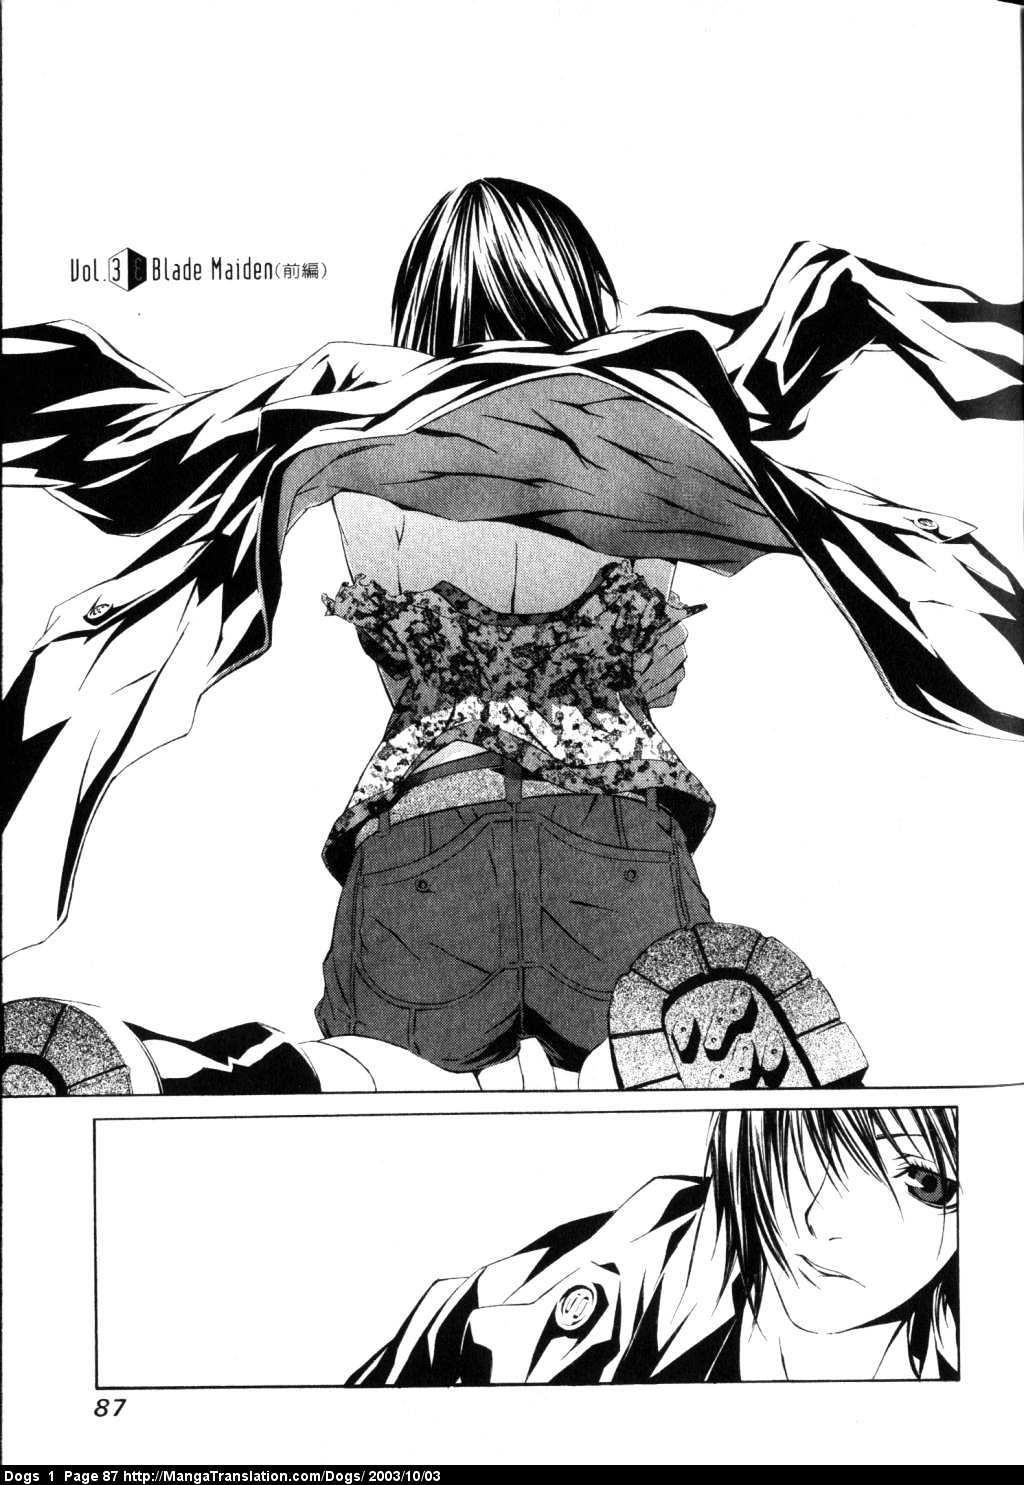 Dogs: Stray Dogs Howling In The Dark Vol.1 Chapter 3 : Blade Maiden - Picture 1